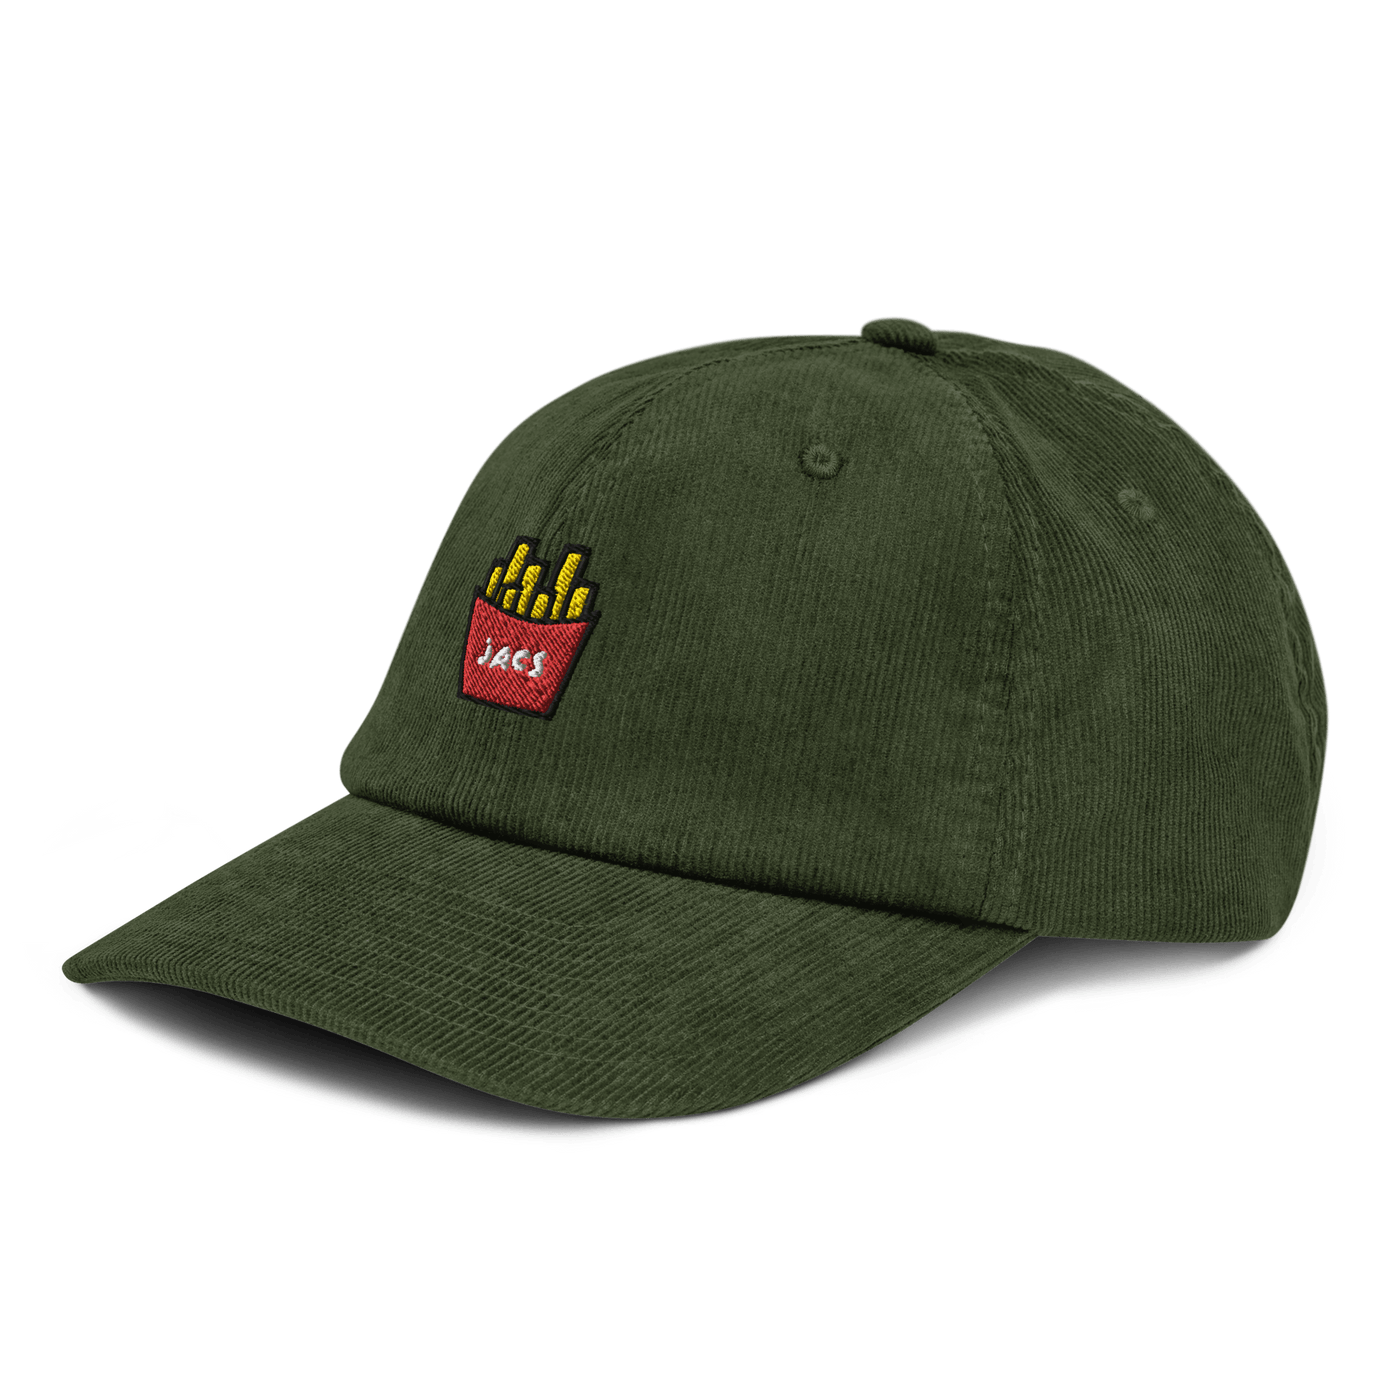 JACS Fries Corduroy hat - Dark Olive - - Just Another Cap Store